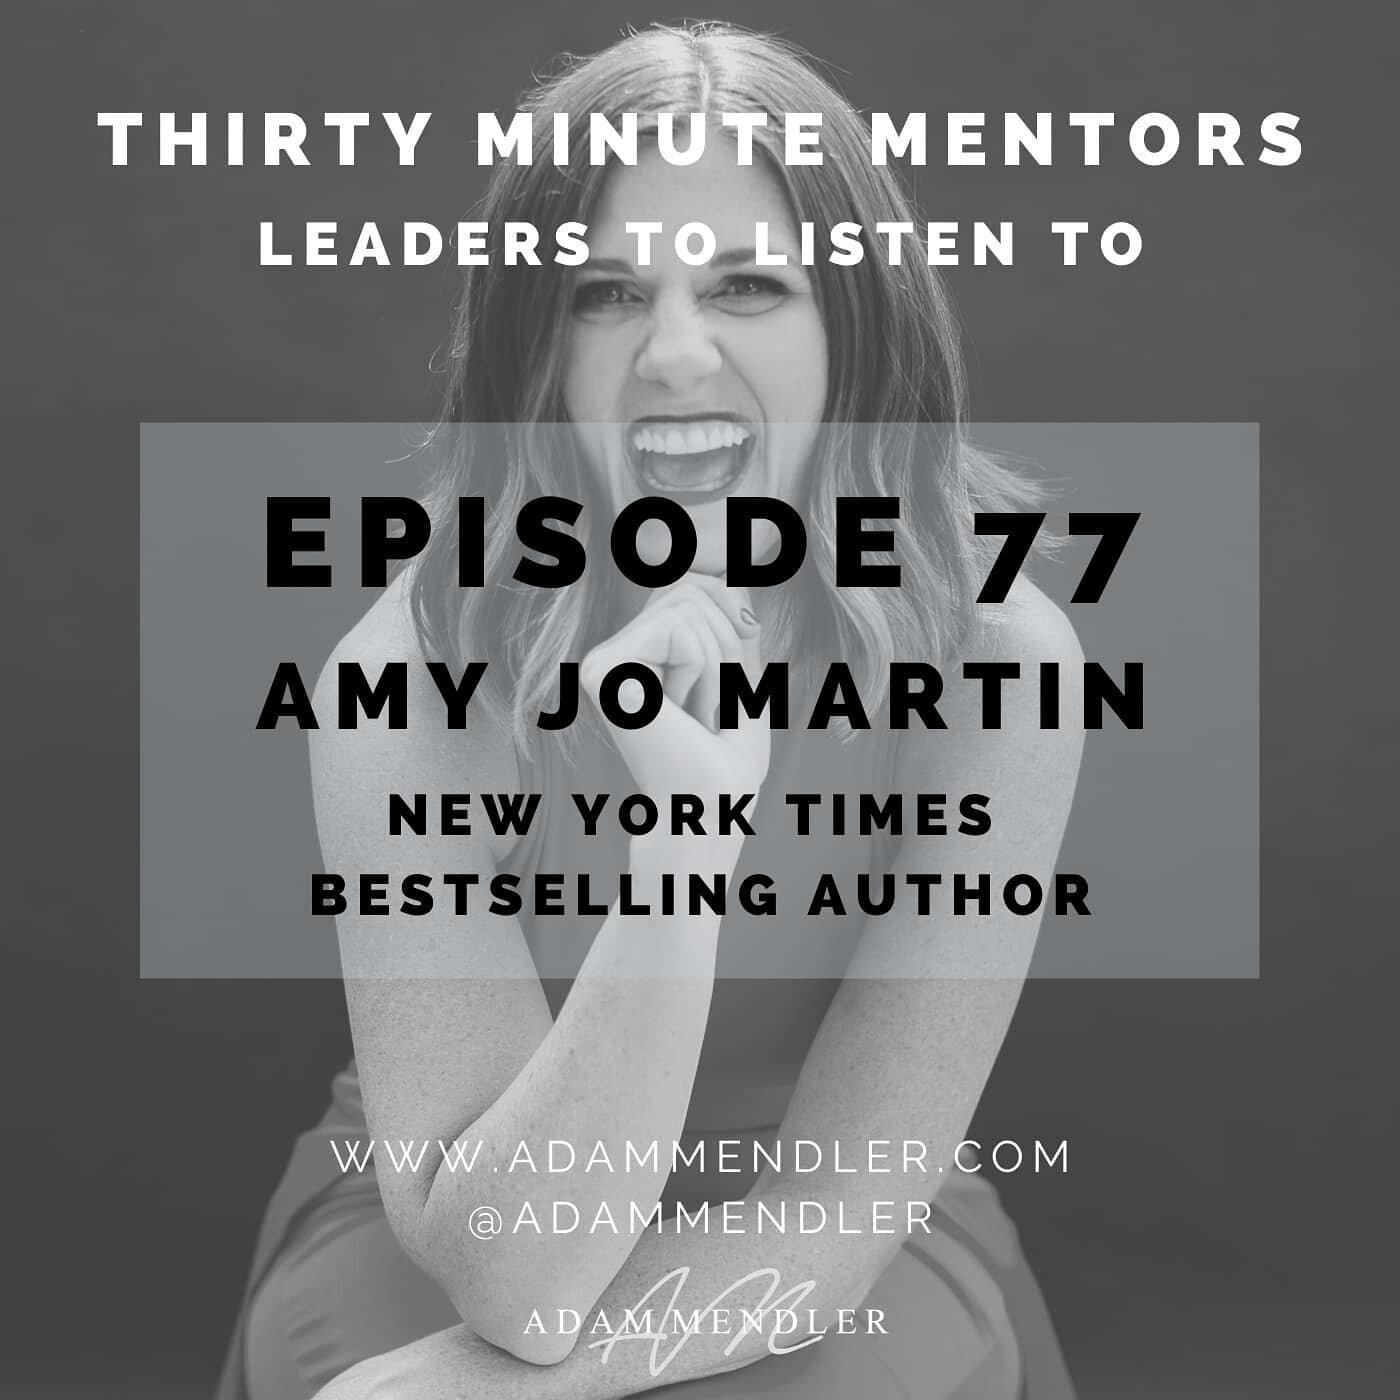 A New York Times bestselling author, @amyjomartin founded one of the first social media companies of all time and her first client was @shaq. Amy Jo joined me on Episode 77 of Thirty Minute Mentors, where we discussed a wide range of topics: entrepre